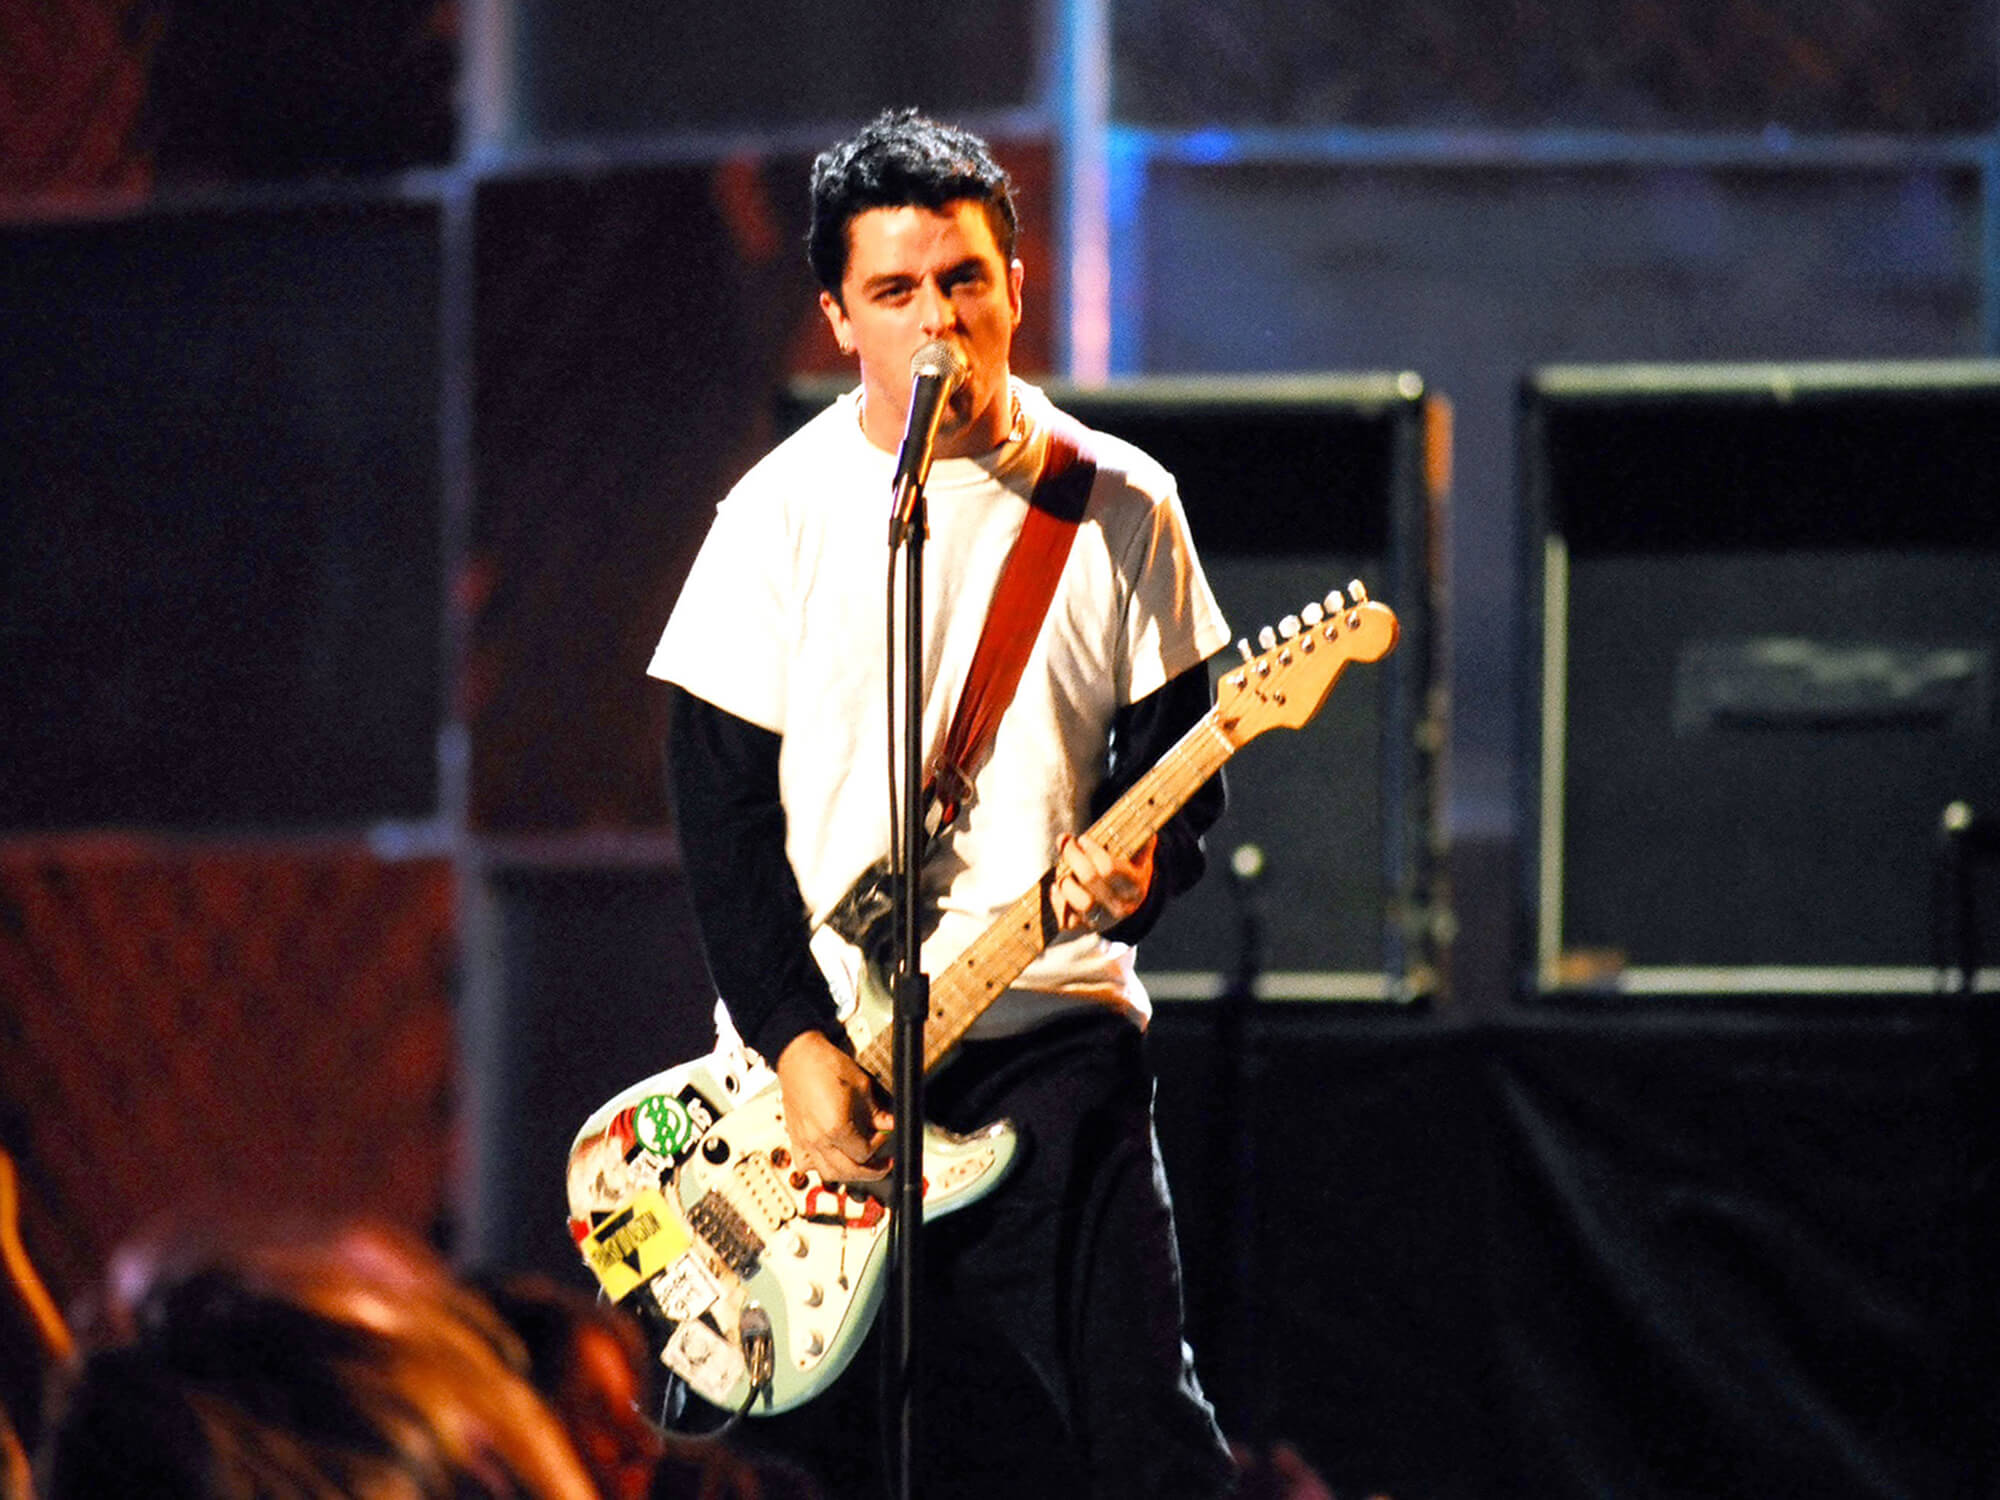 Billie Joe Armstrong of Green Day performing at 1994 MTV Video Music Awards by Jeff Kravitz/Film Magic via Getty Images